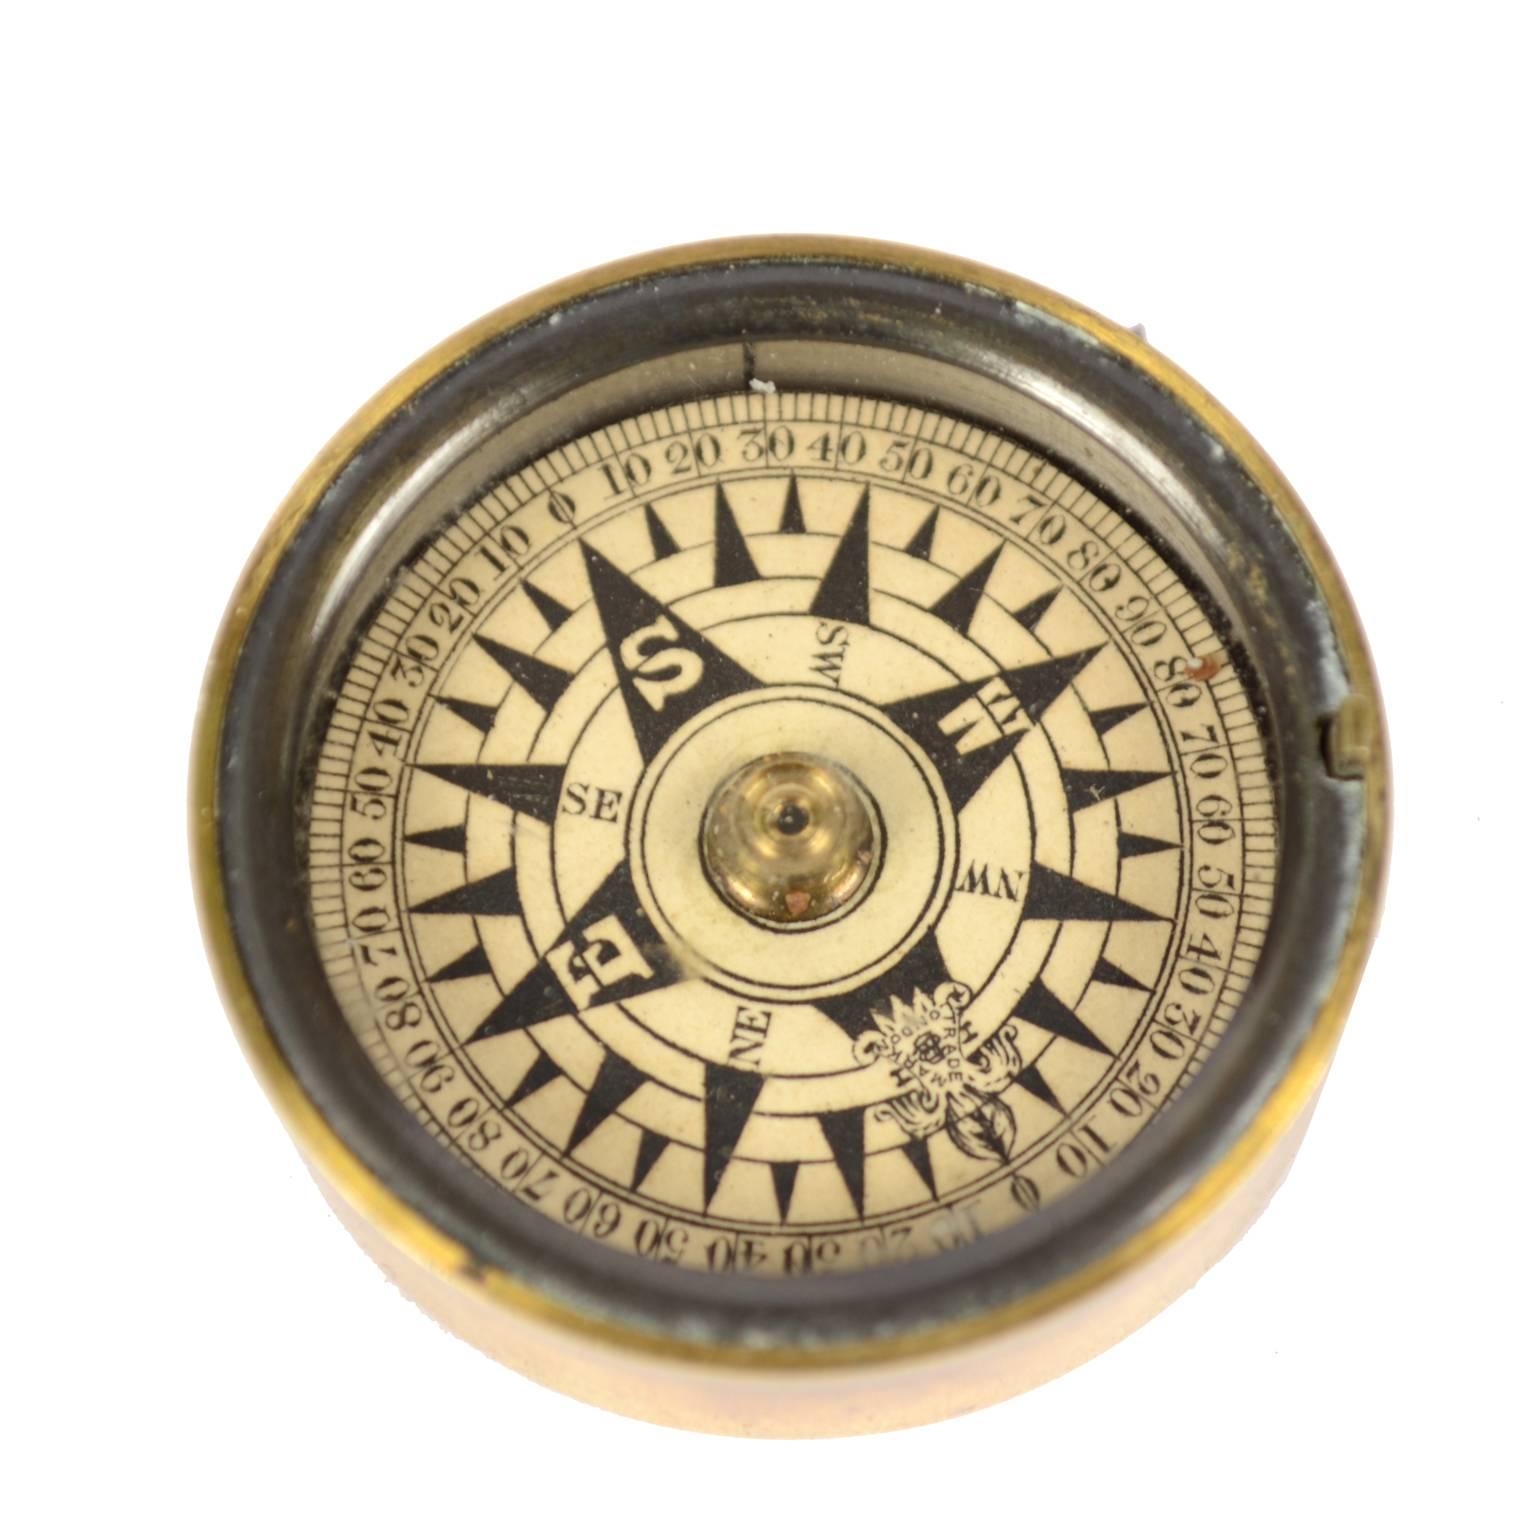 Small dry pocket nautical compass placed in its original box made of turned brass, complete with brass cover and closed by a protective glass. From the Victorian era of the second half of the 19th century. Eight-wind compass card printed on paper by